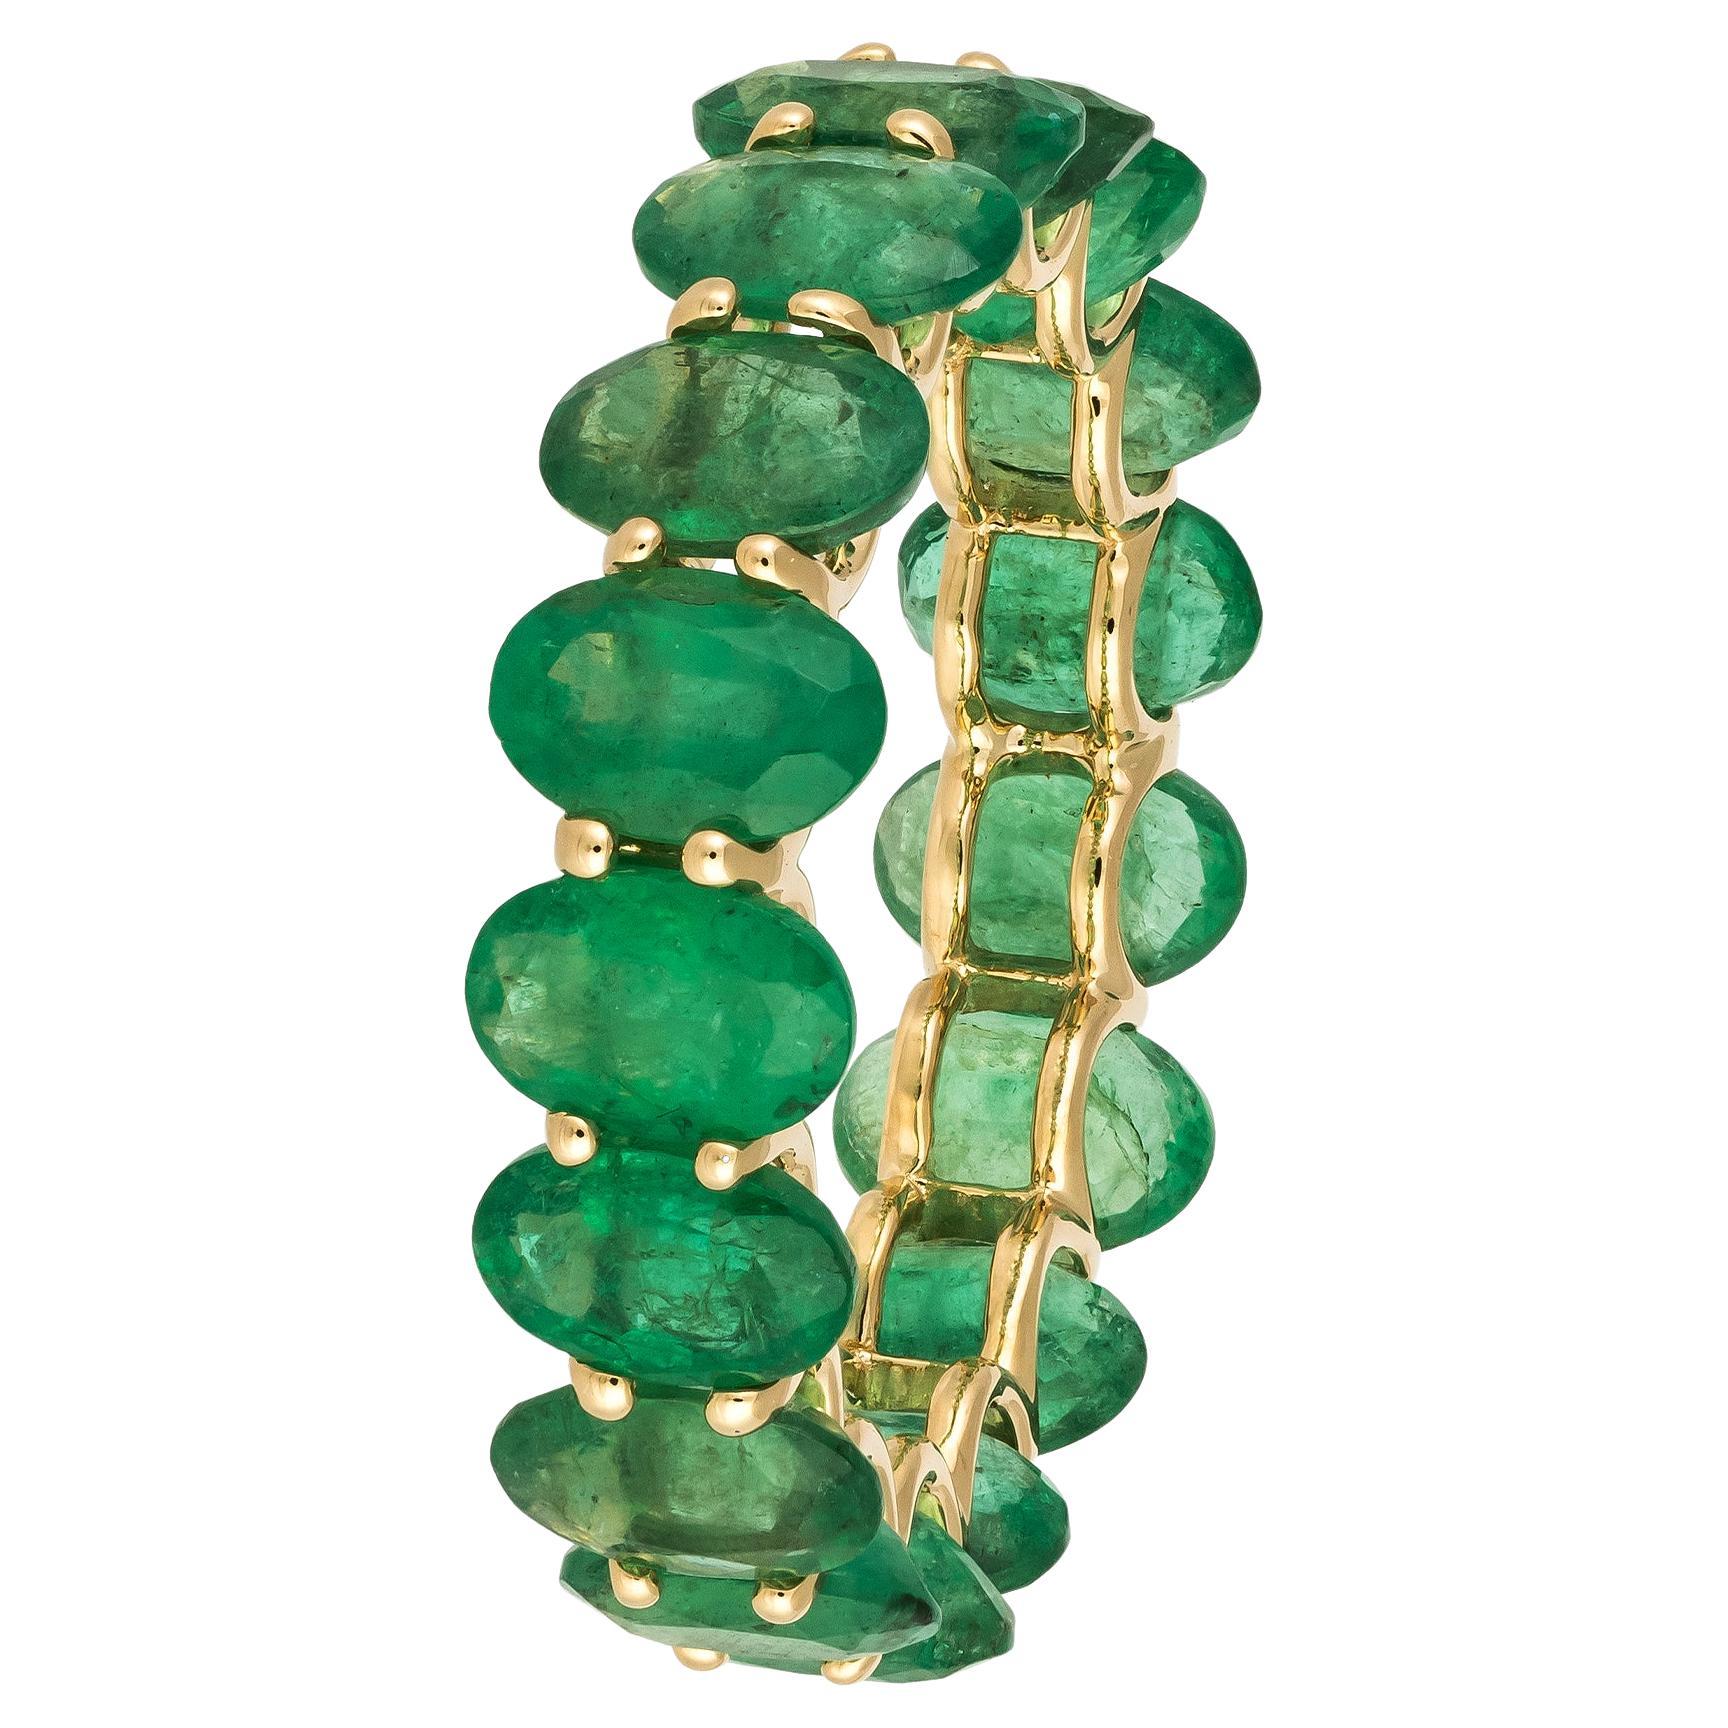 NWT $6500 18KT Gold Fancy Large Glittering Fancy Oval Emerald Eternity Band Ring For Sale